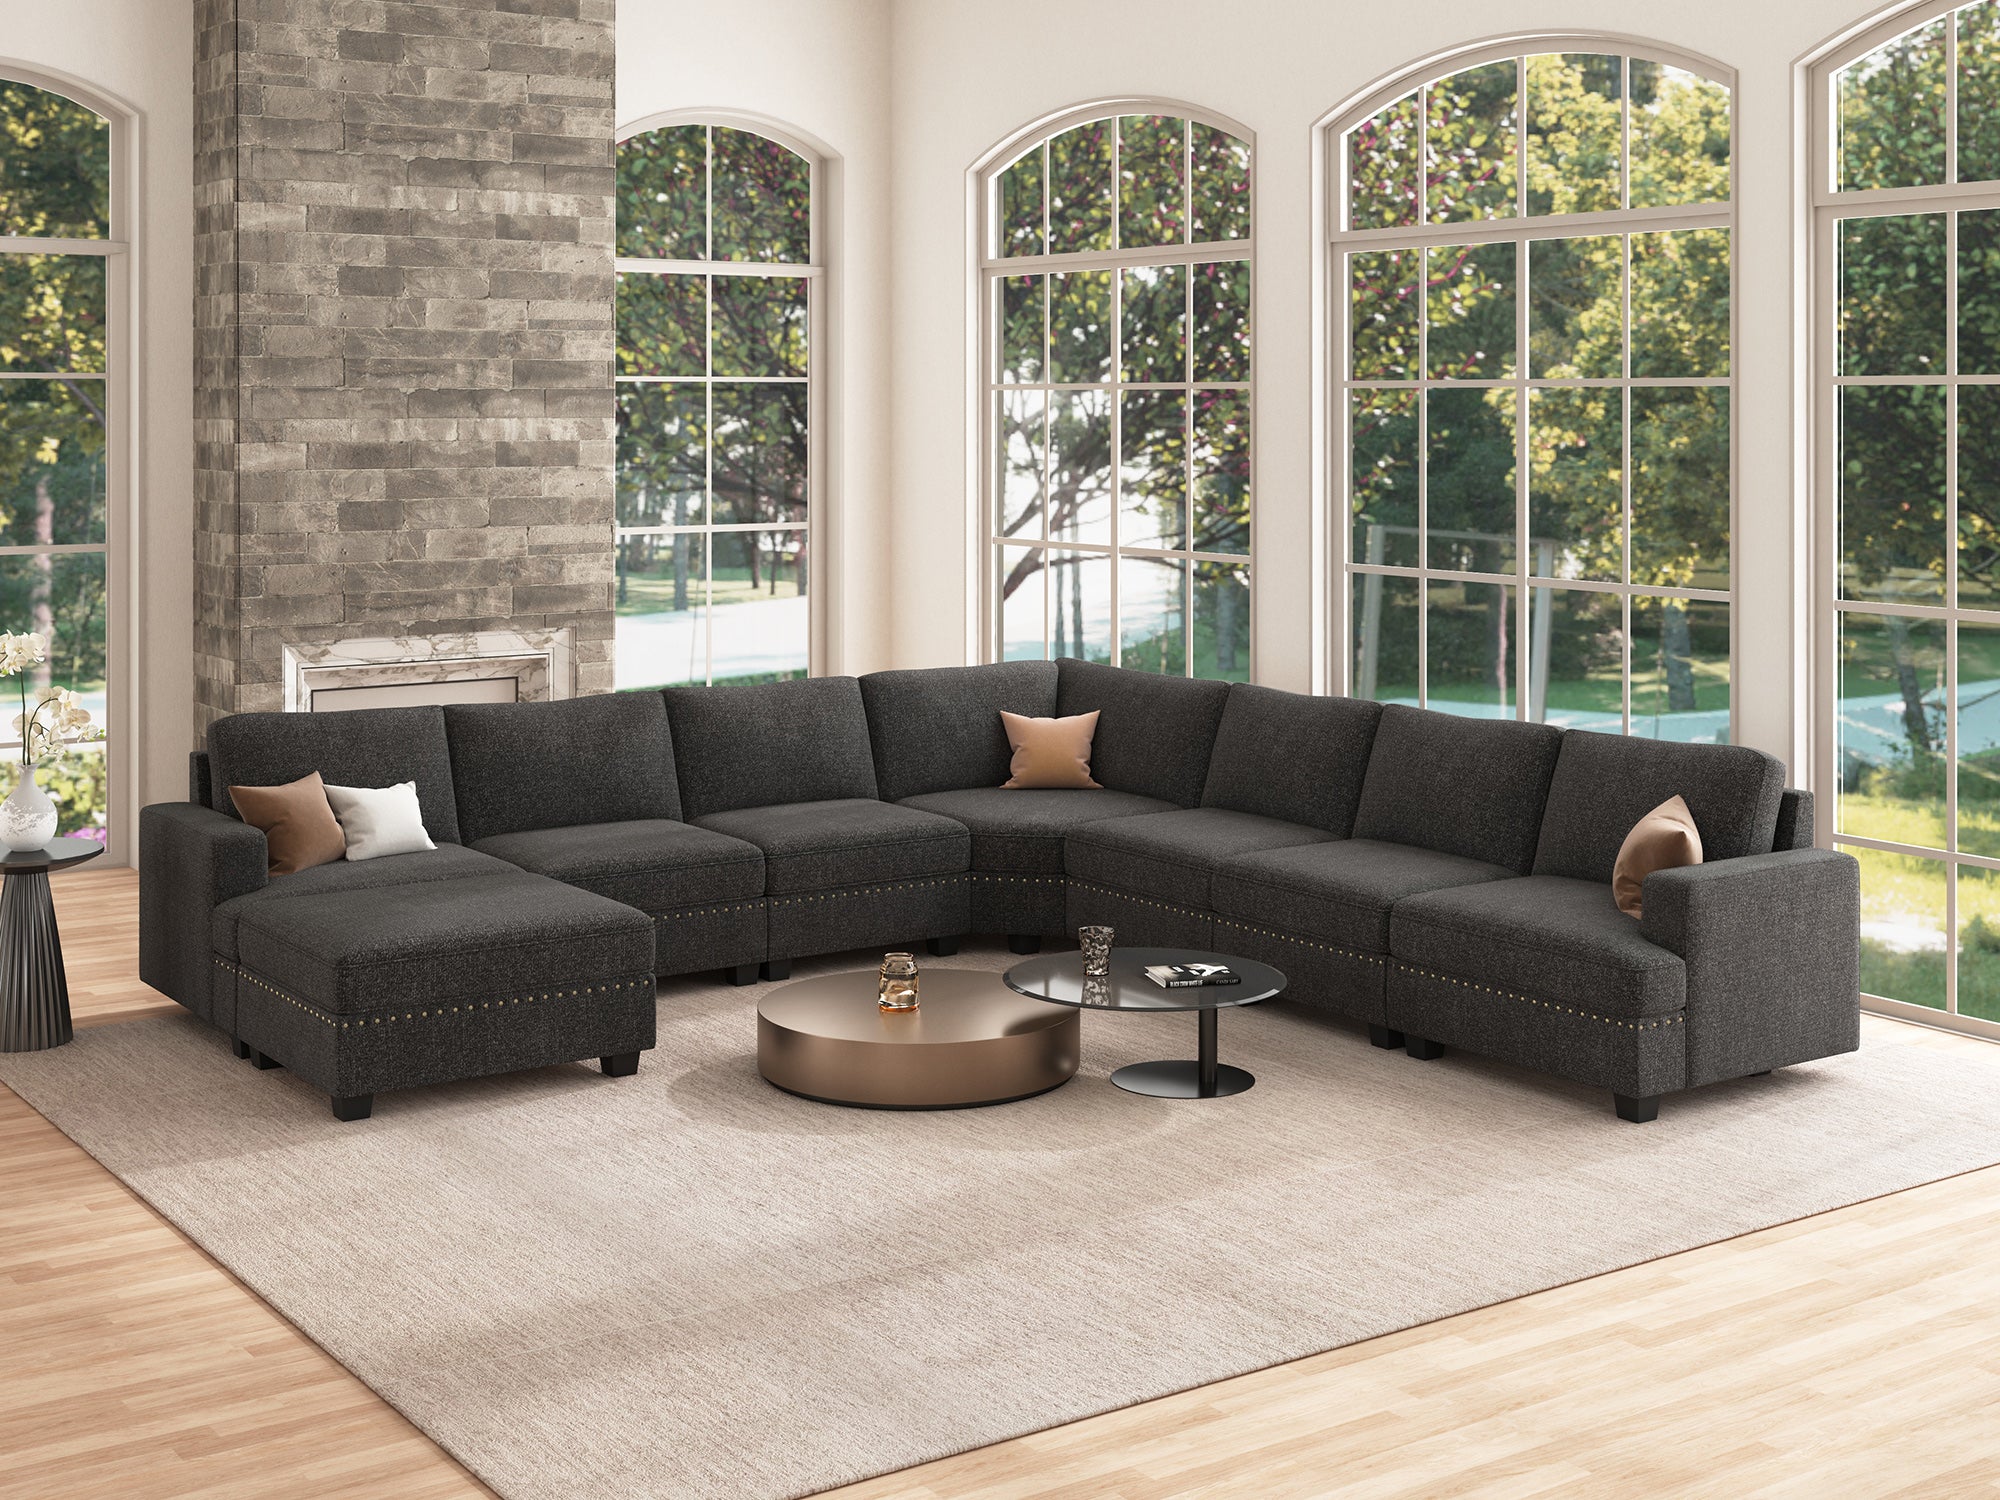 HONBAY 7-Seat Corner Modular Sofa Oversized Sectional Sofa Couch with Storage Ottoman #Color_Dark Grey